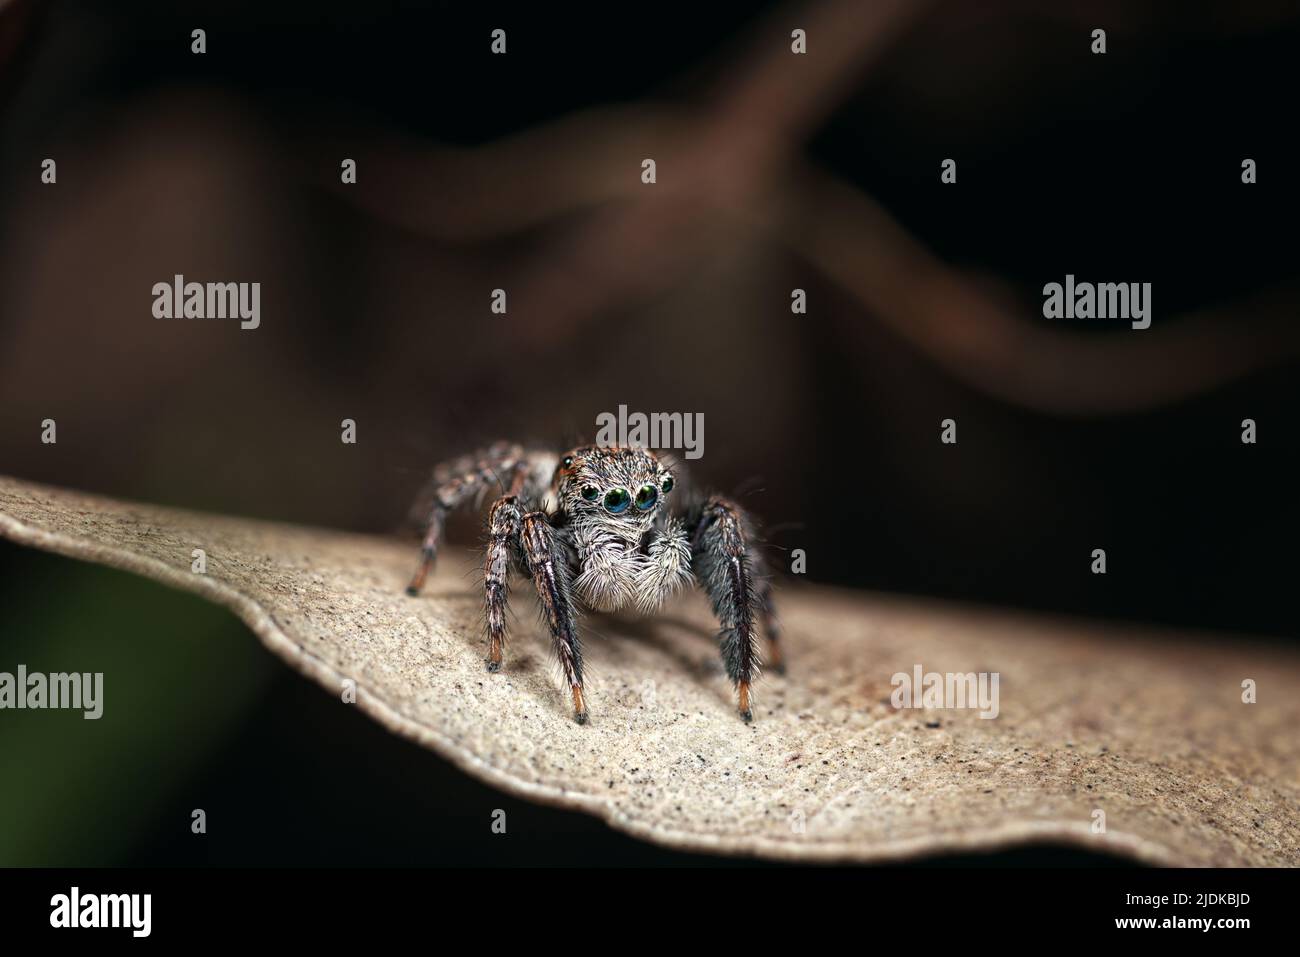 male jumping spider with green eyes and large white palps standing on a pale leaf against a dark background Stock Photo